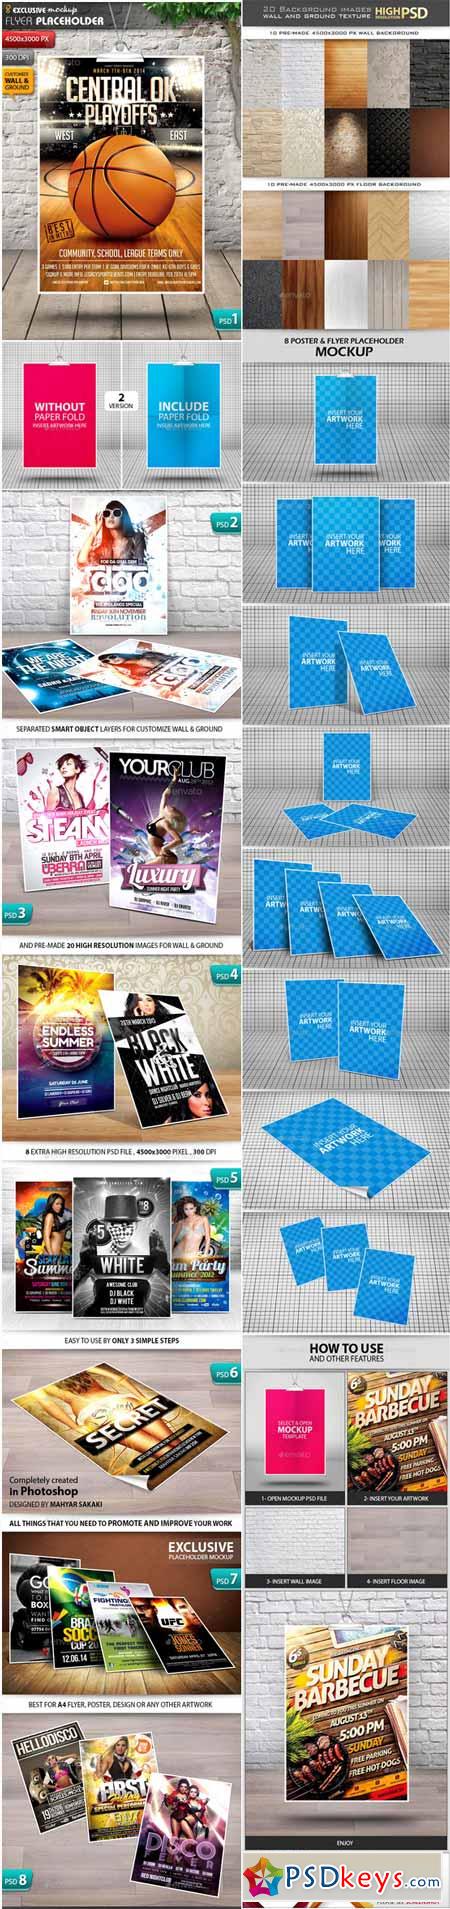 Download Exclusive A4 Flyer & Poster Mockup V1.0 11902769 » Free Download Photoshop Vector Stock image ...